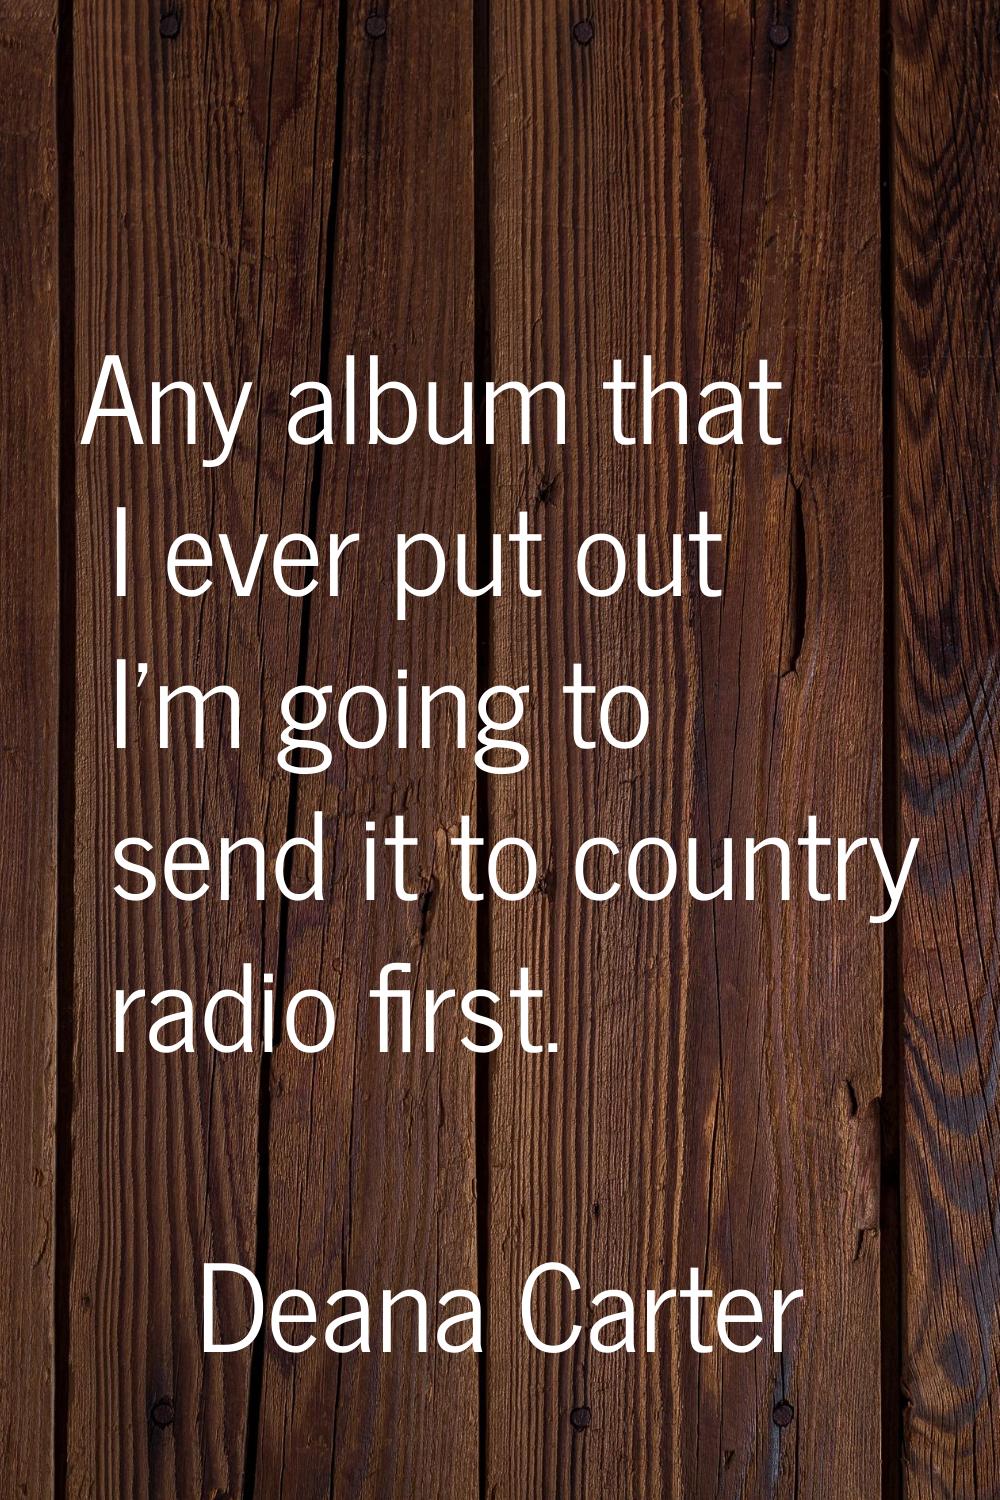 Any album that I ever put out I'm going to send it to country radio first.